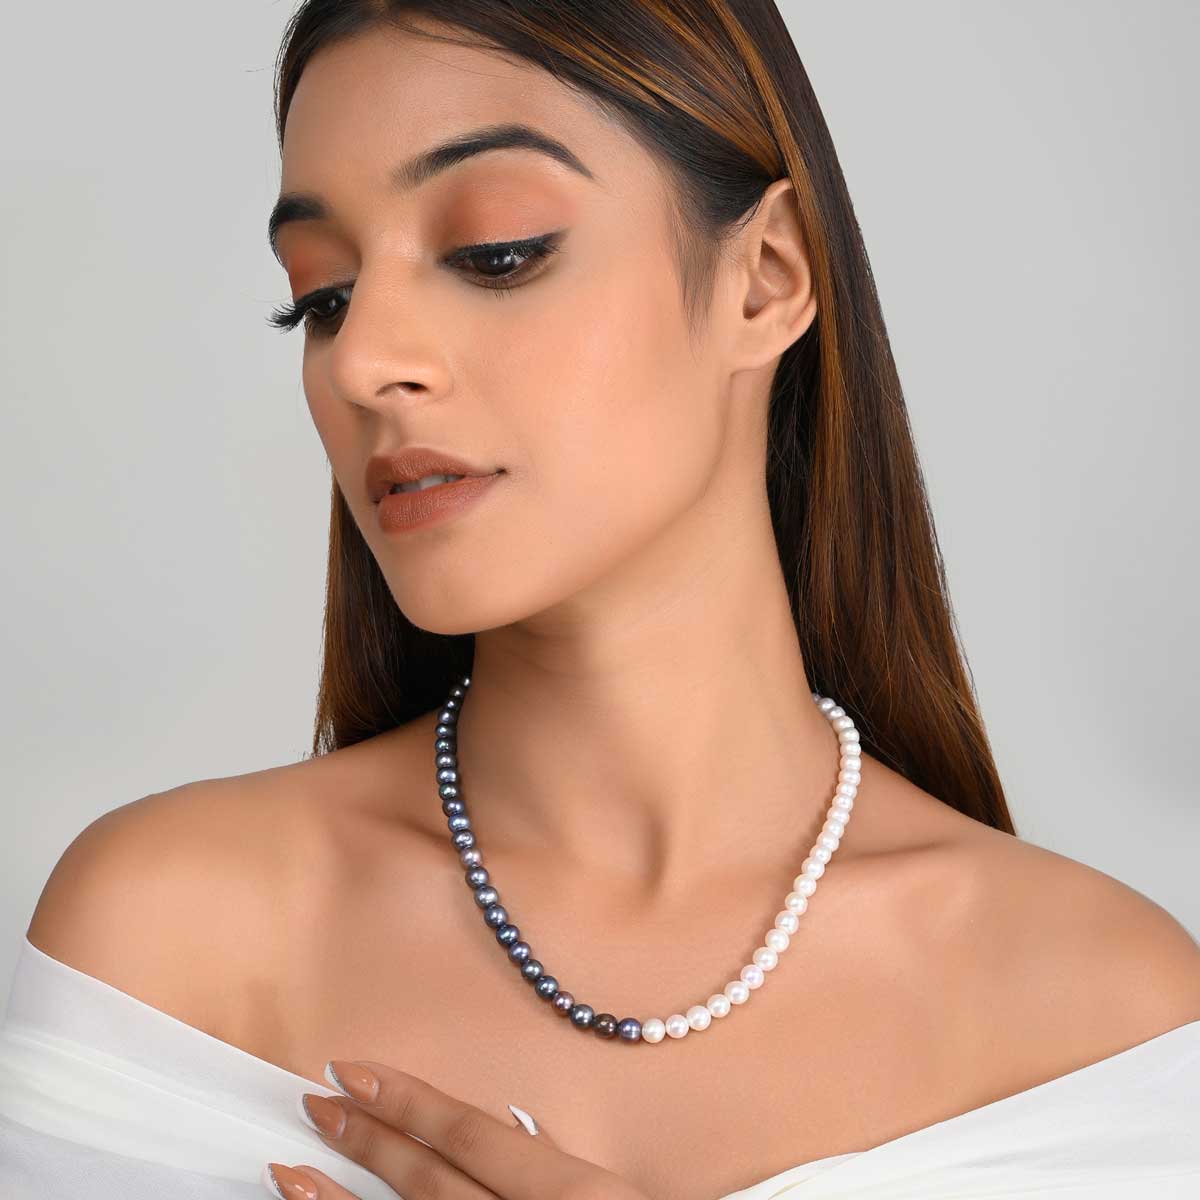 Designer Pearl Necklace With Smooth Beads